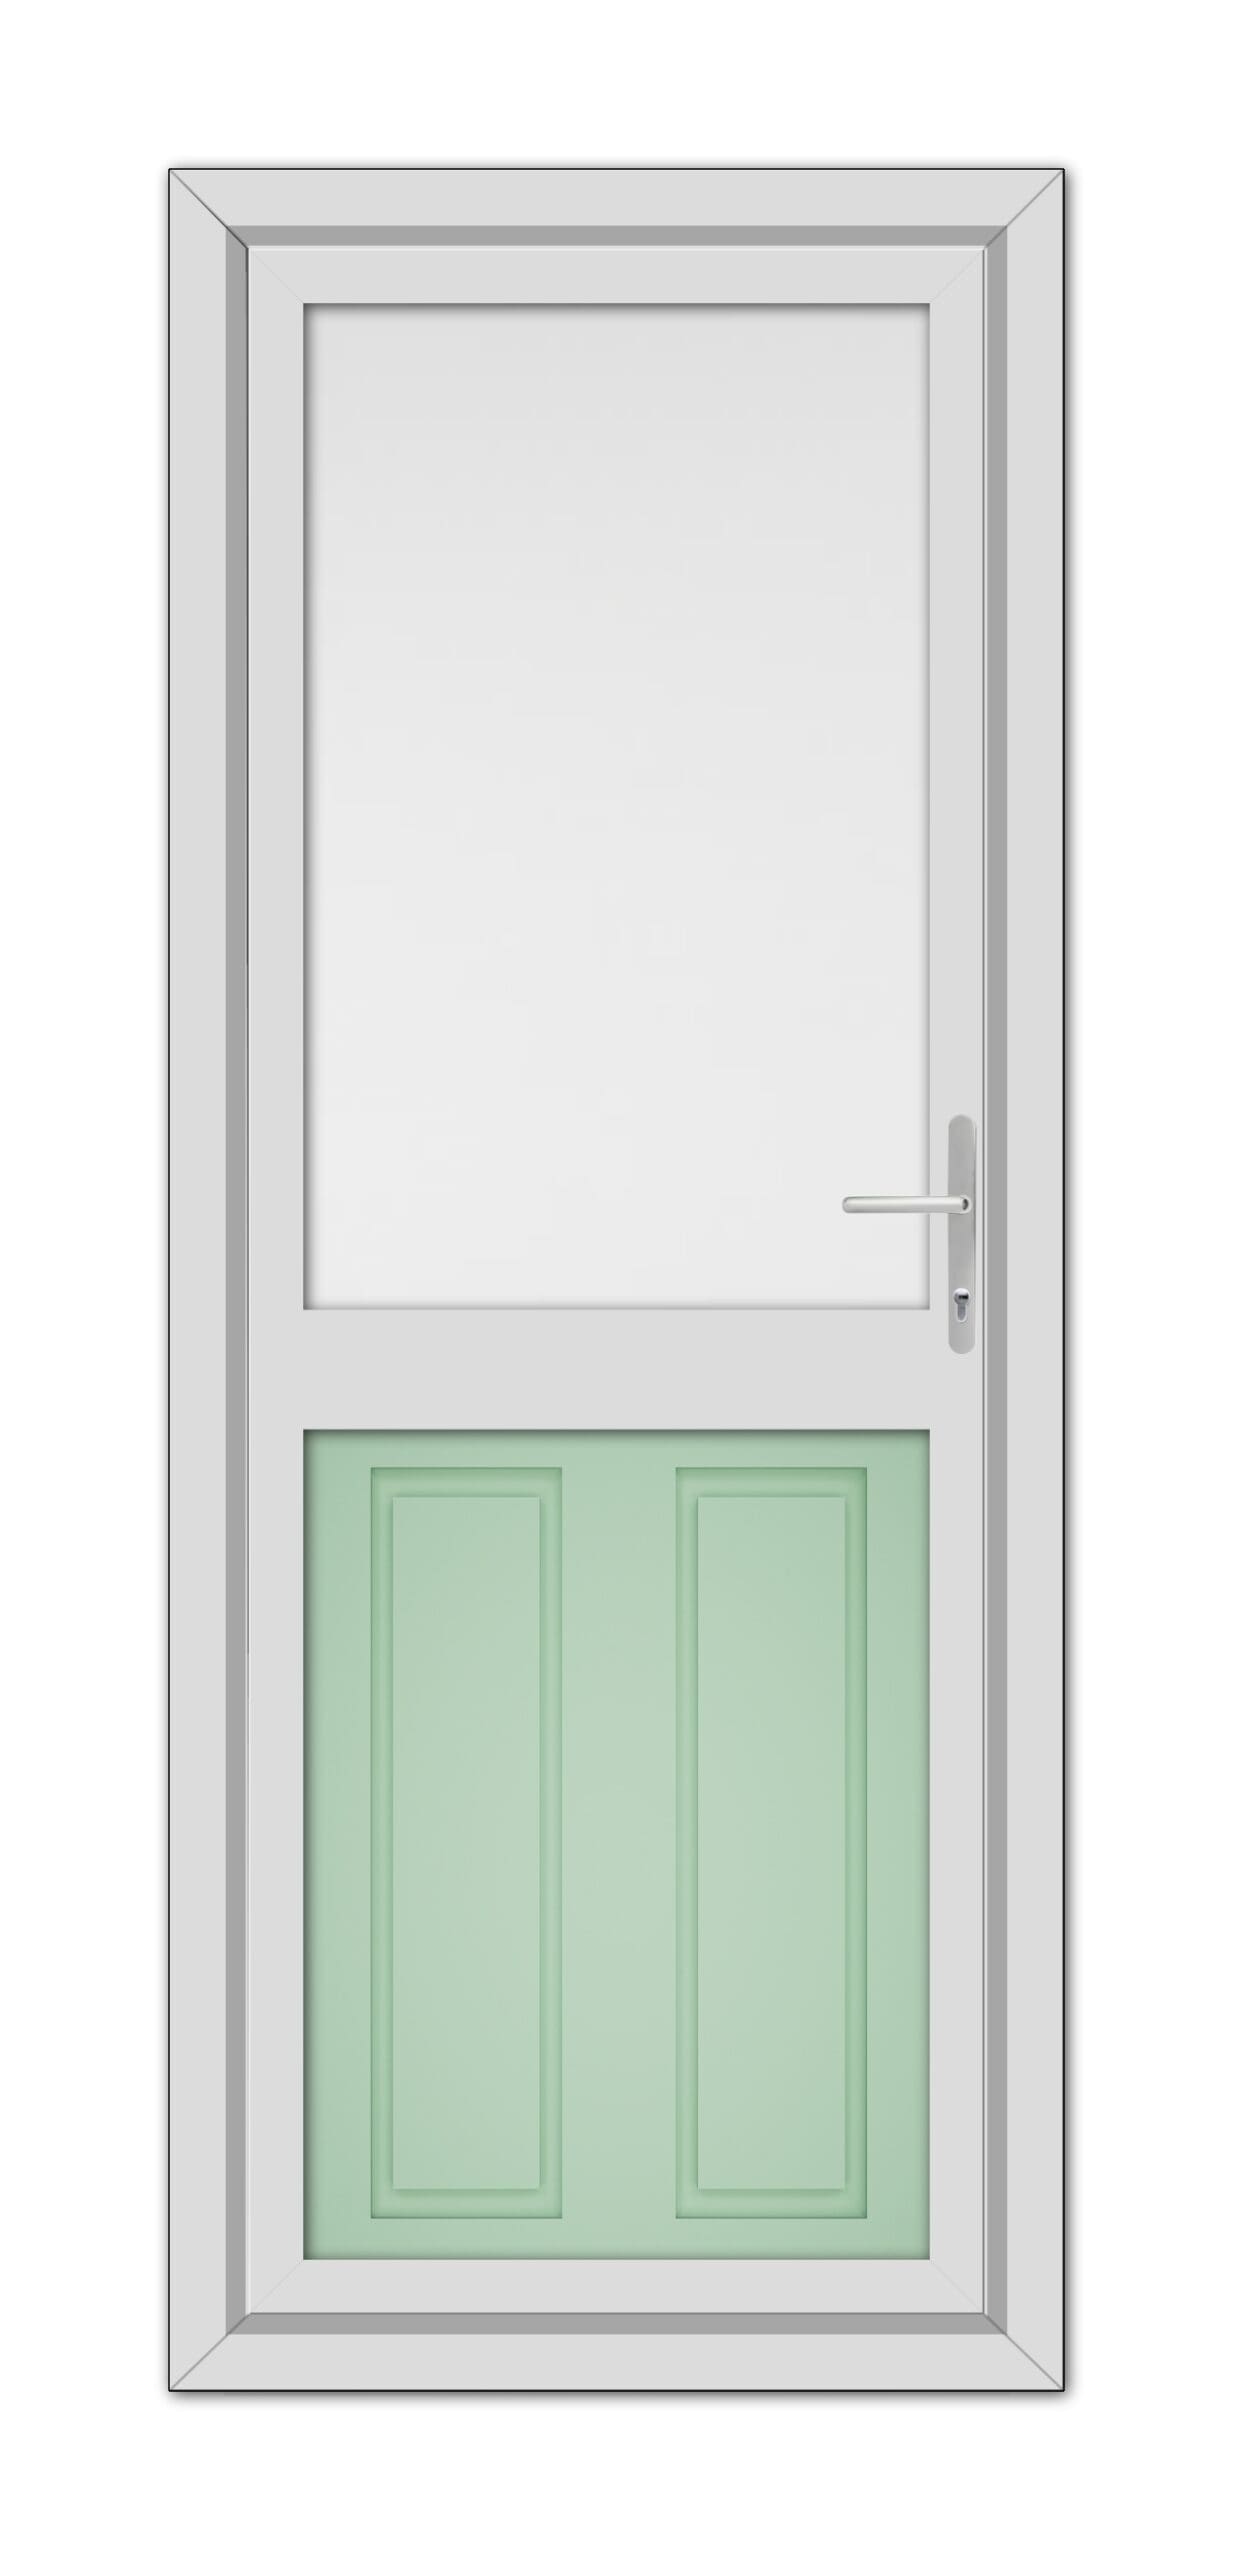 A modern closed door with a white frame and two Chartwell Green Manor Half uPVC panels, featuring a silver handle on the right side.